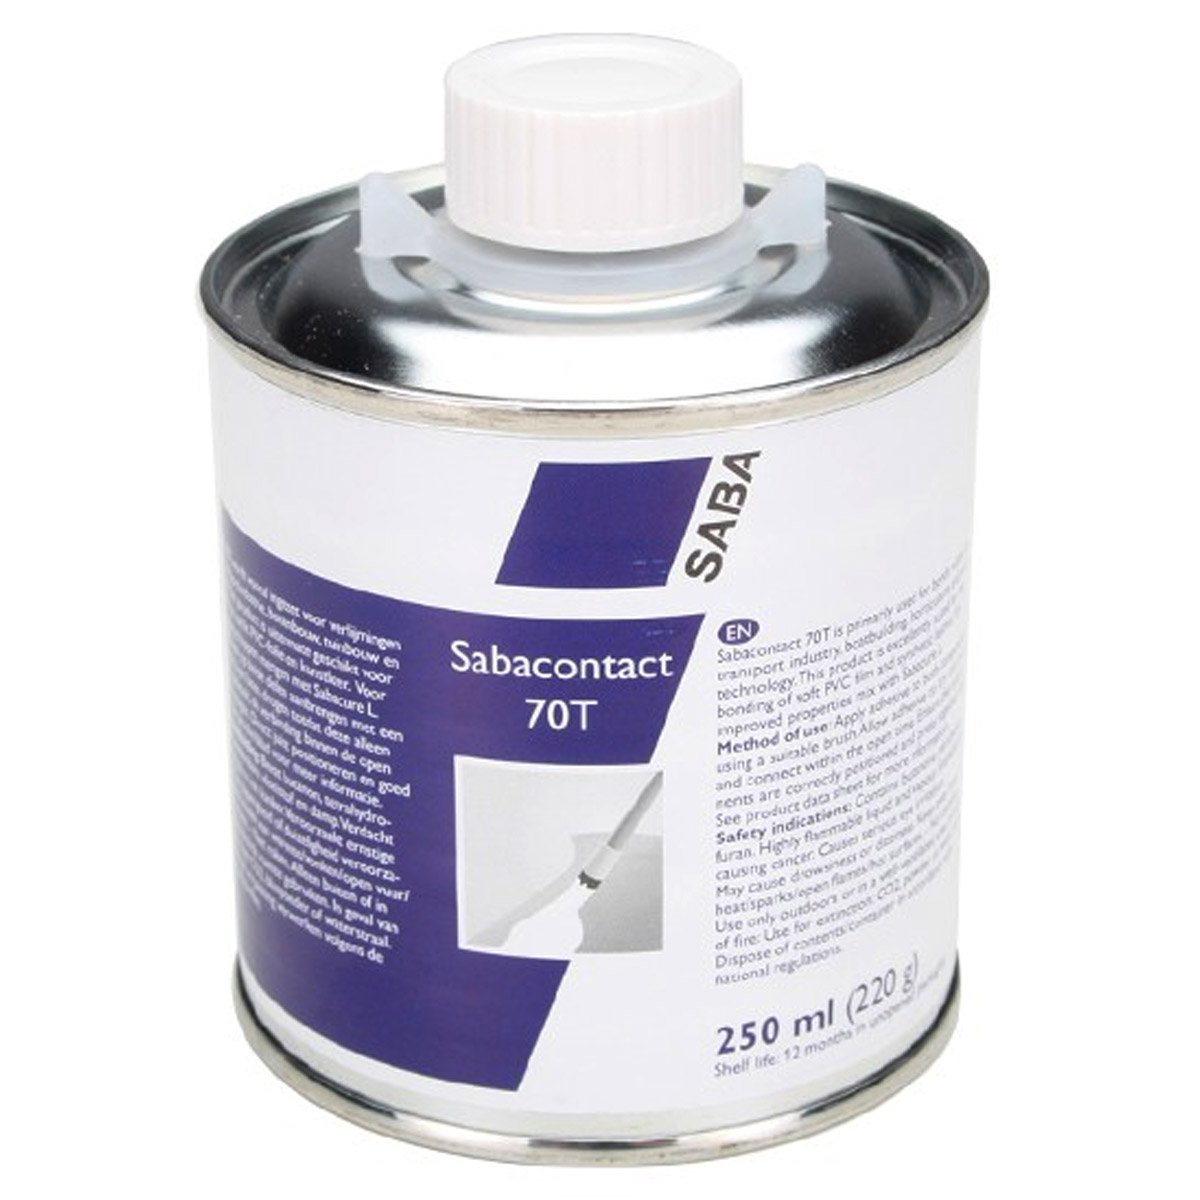 Sabacontact Belly Boat PVC Glue